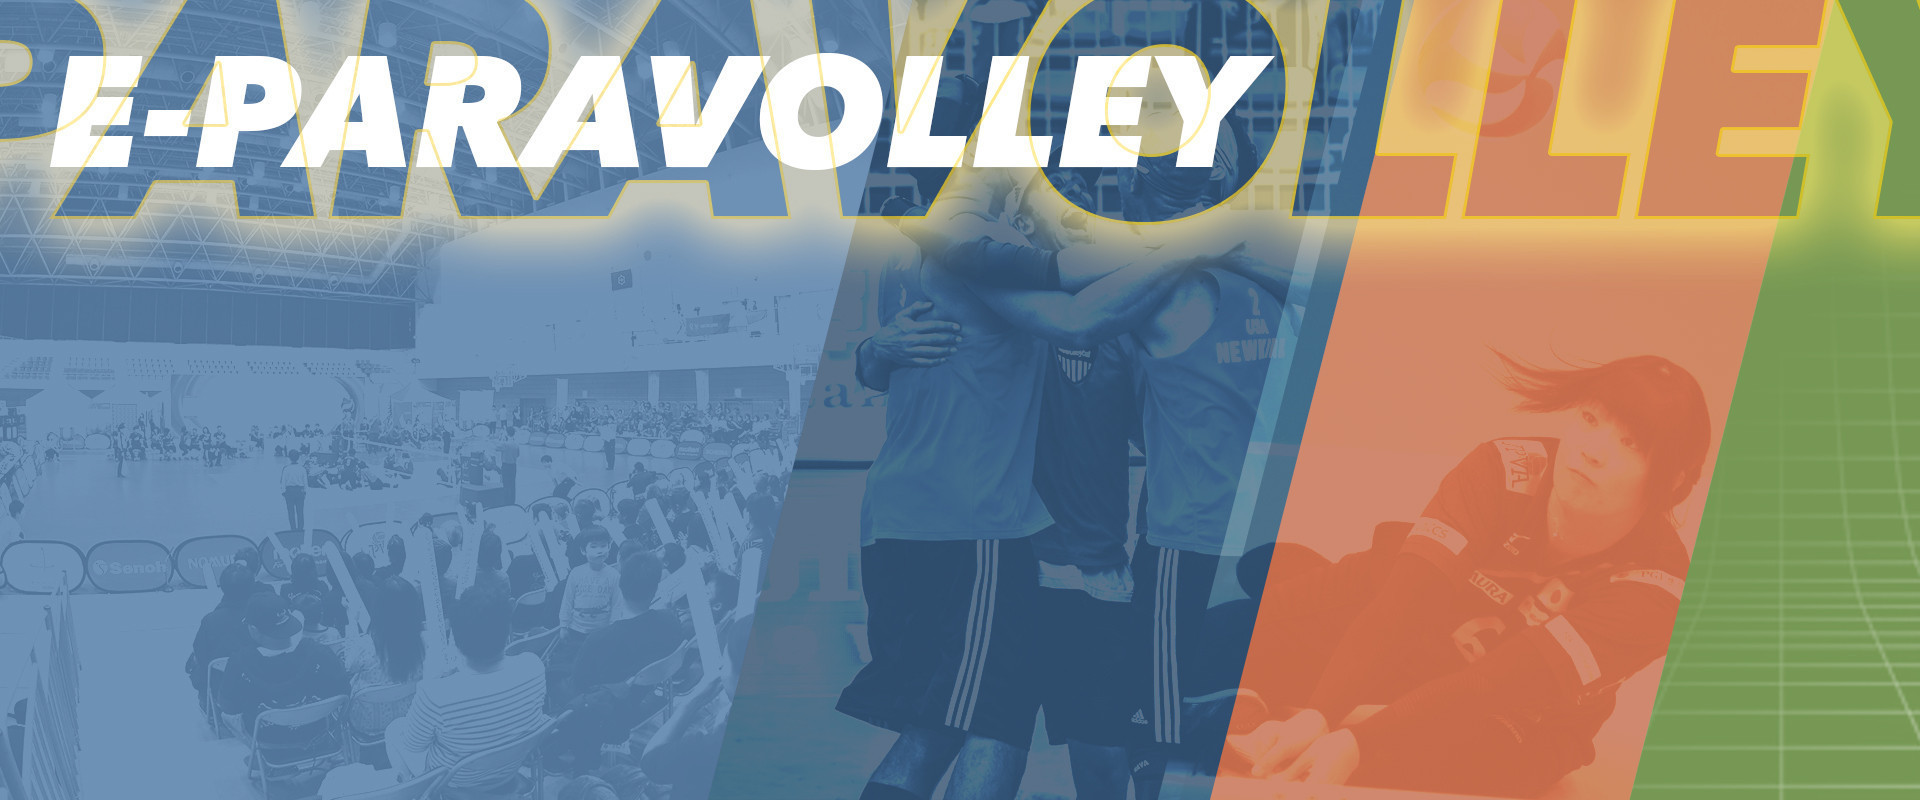 E-ParaVolley, an online education platform, will come under the new development director's remit ©World ParaVolley